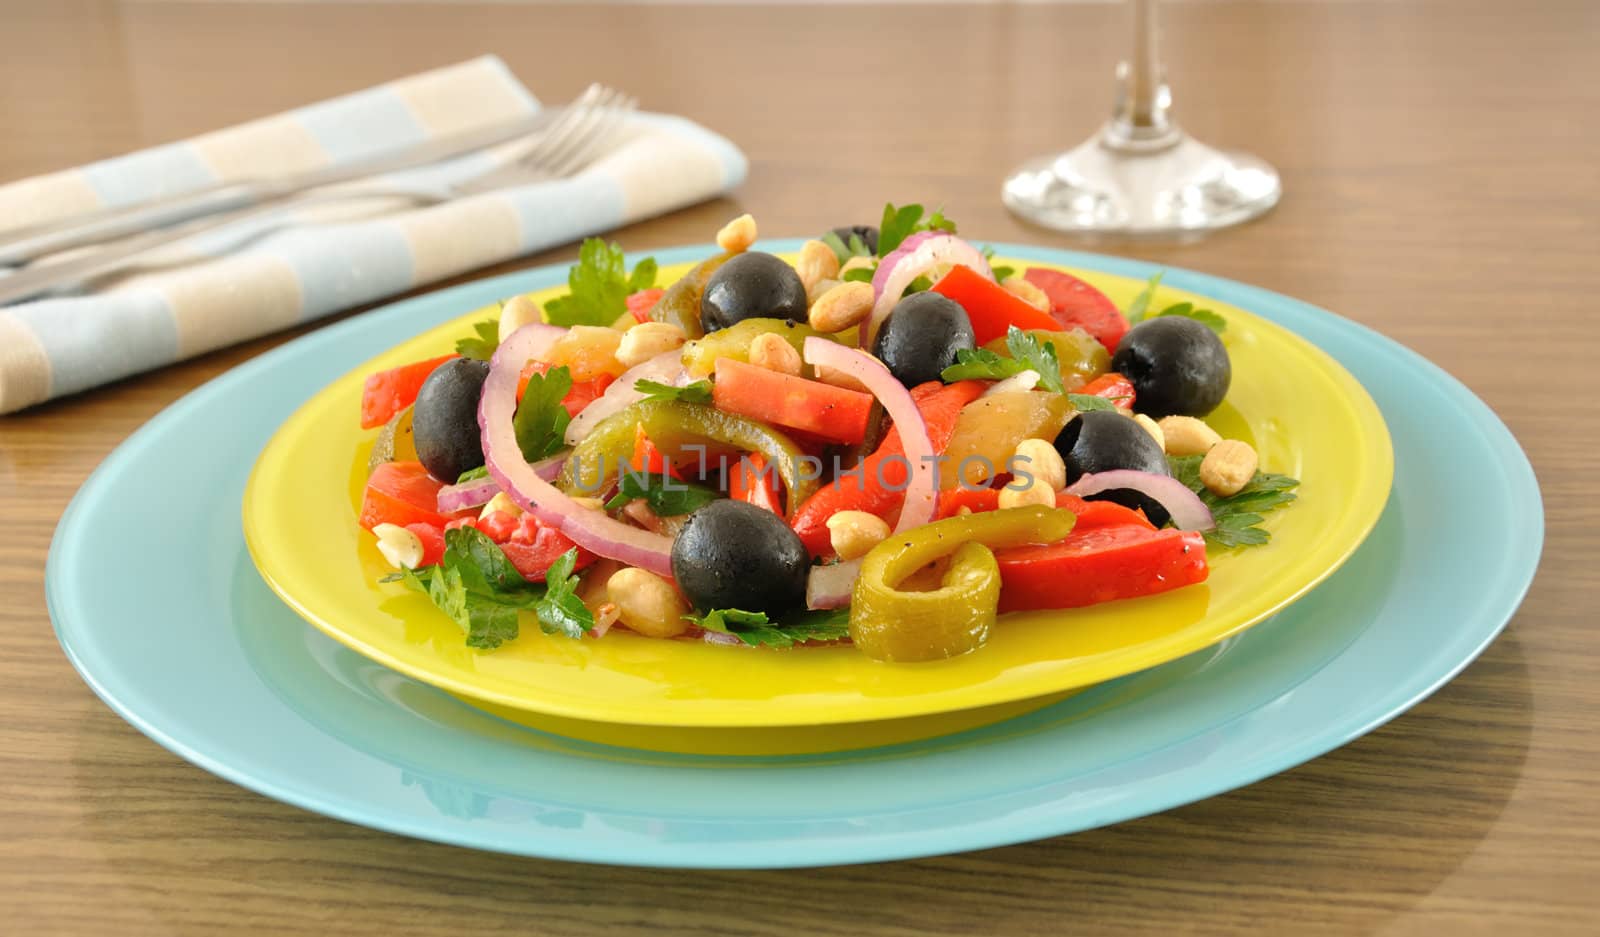 Salad of roasted peppers with tomato, peanuts and olives by Apolonia